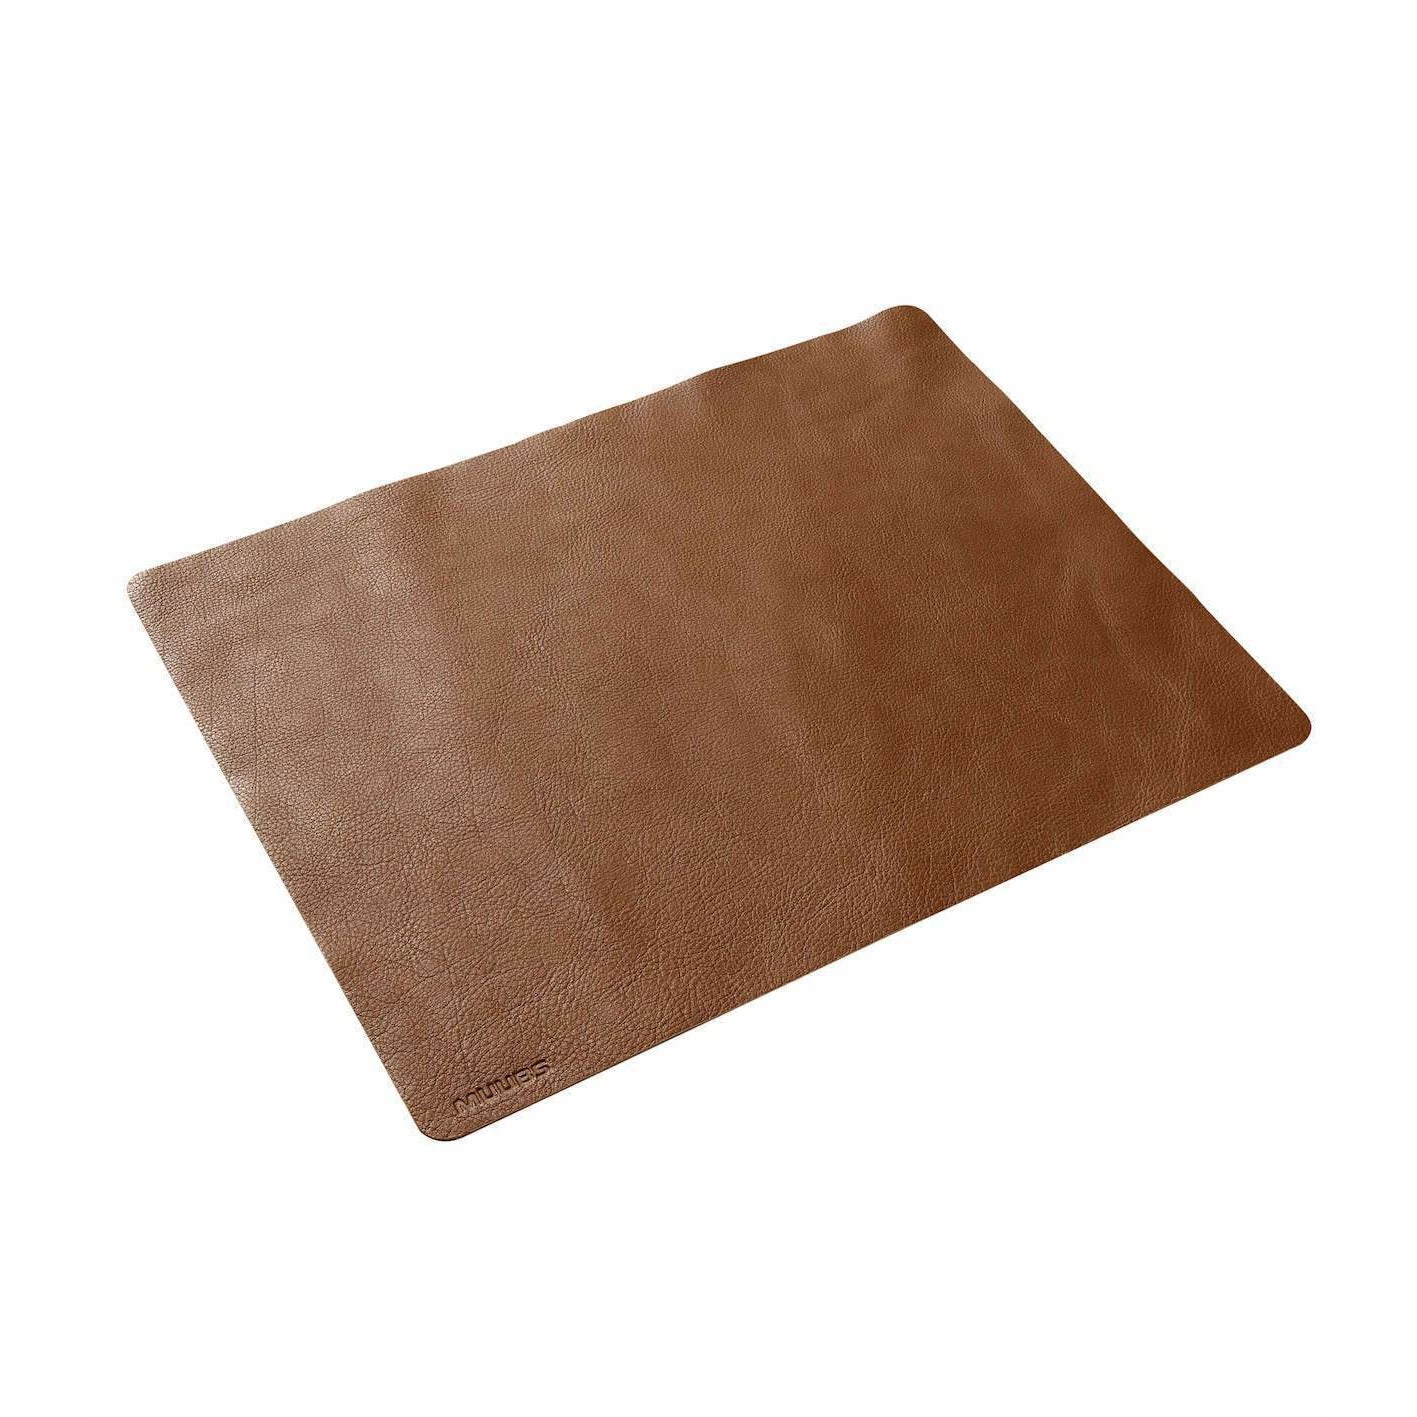 Muubs Camou Placemat 45 cm, cuir marron